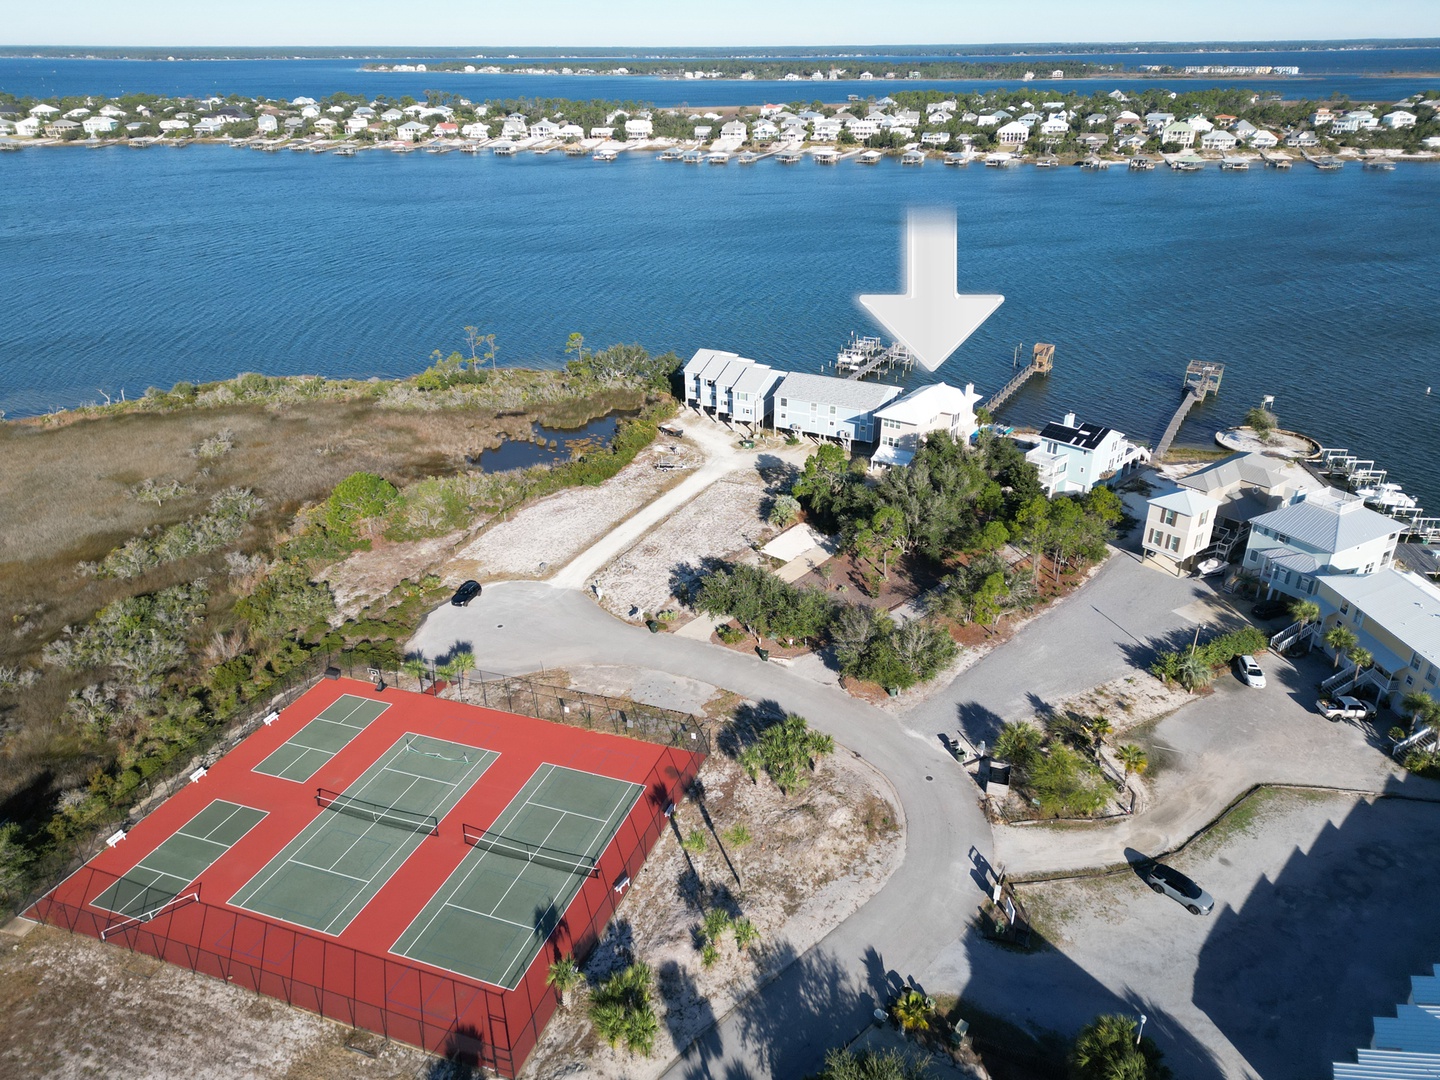 Blue Heron is a multi-level home on Old River with community tennis and pickle ball courts